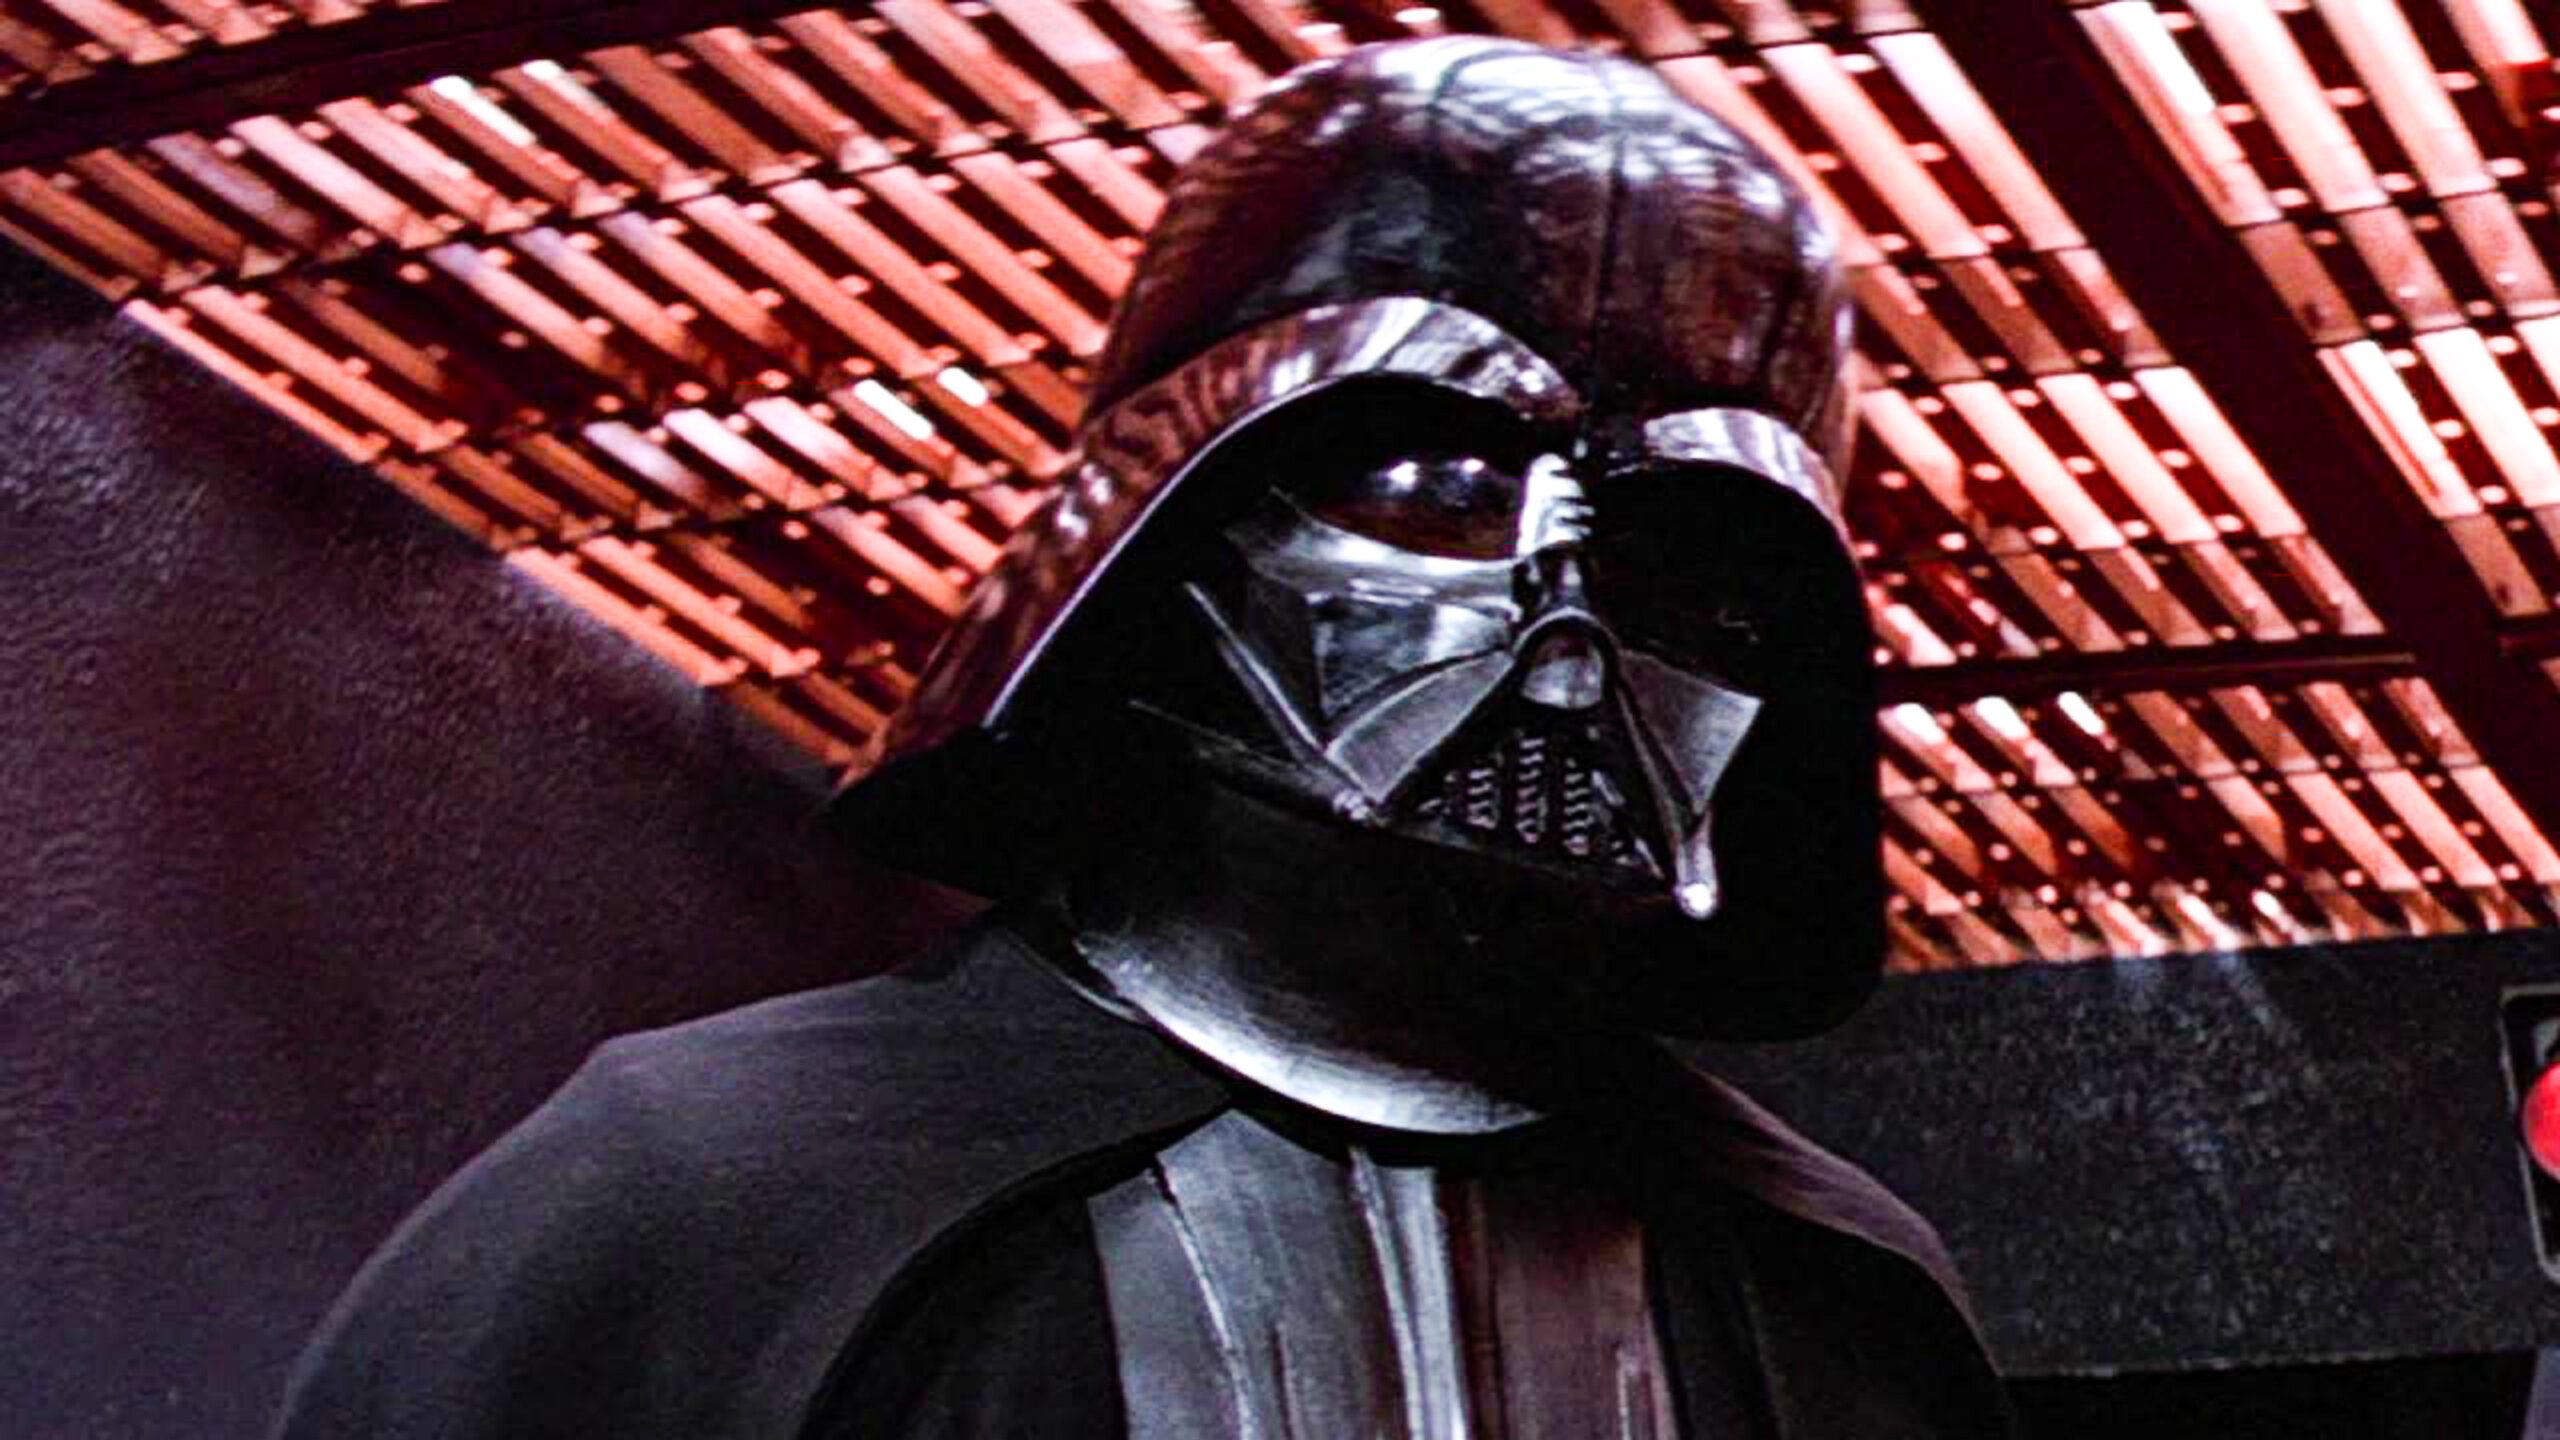 Darth Vader to return in ‘Star Wars’ spin-off, ‘Rogue One’